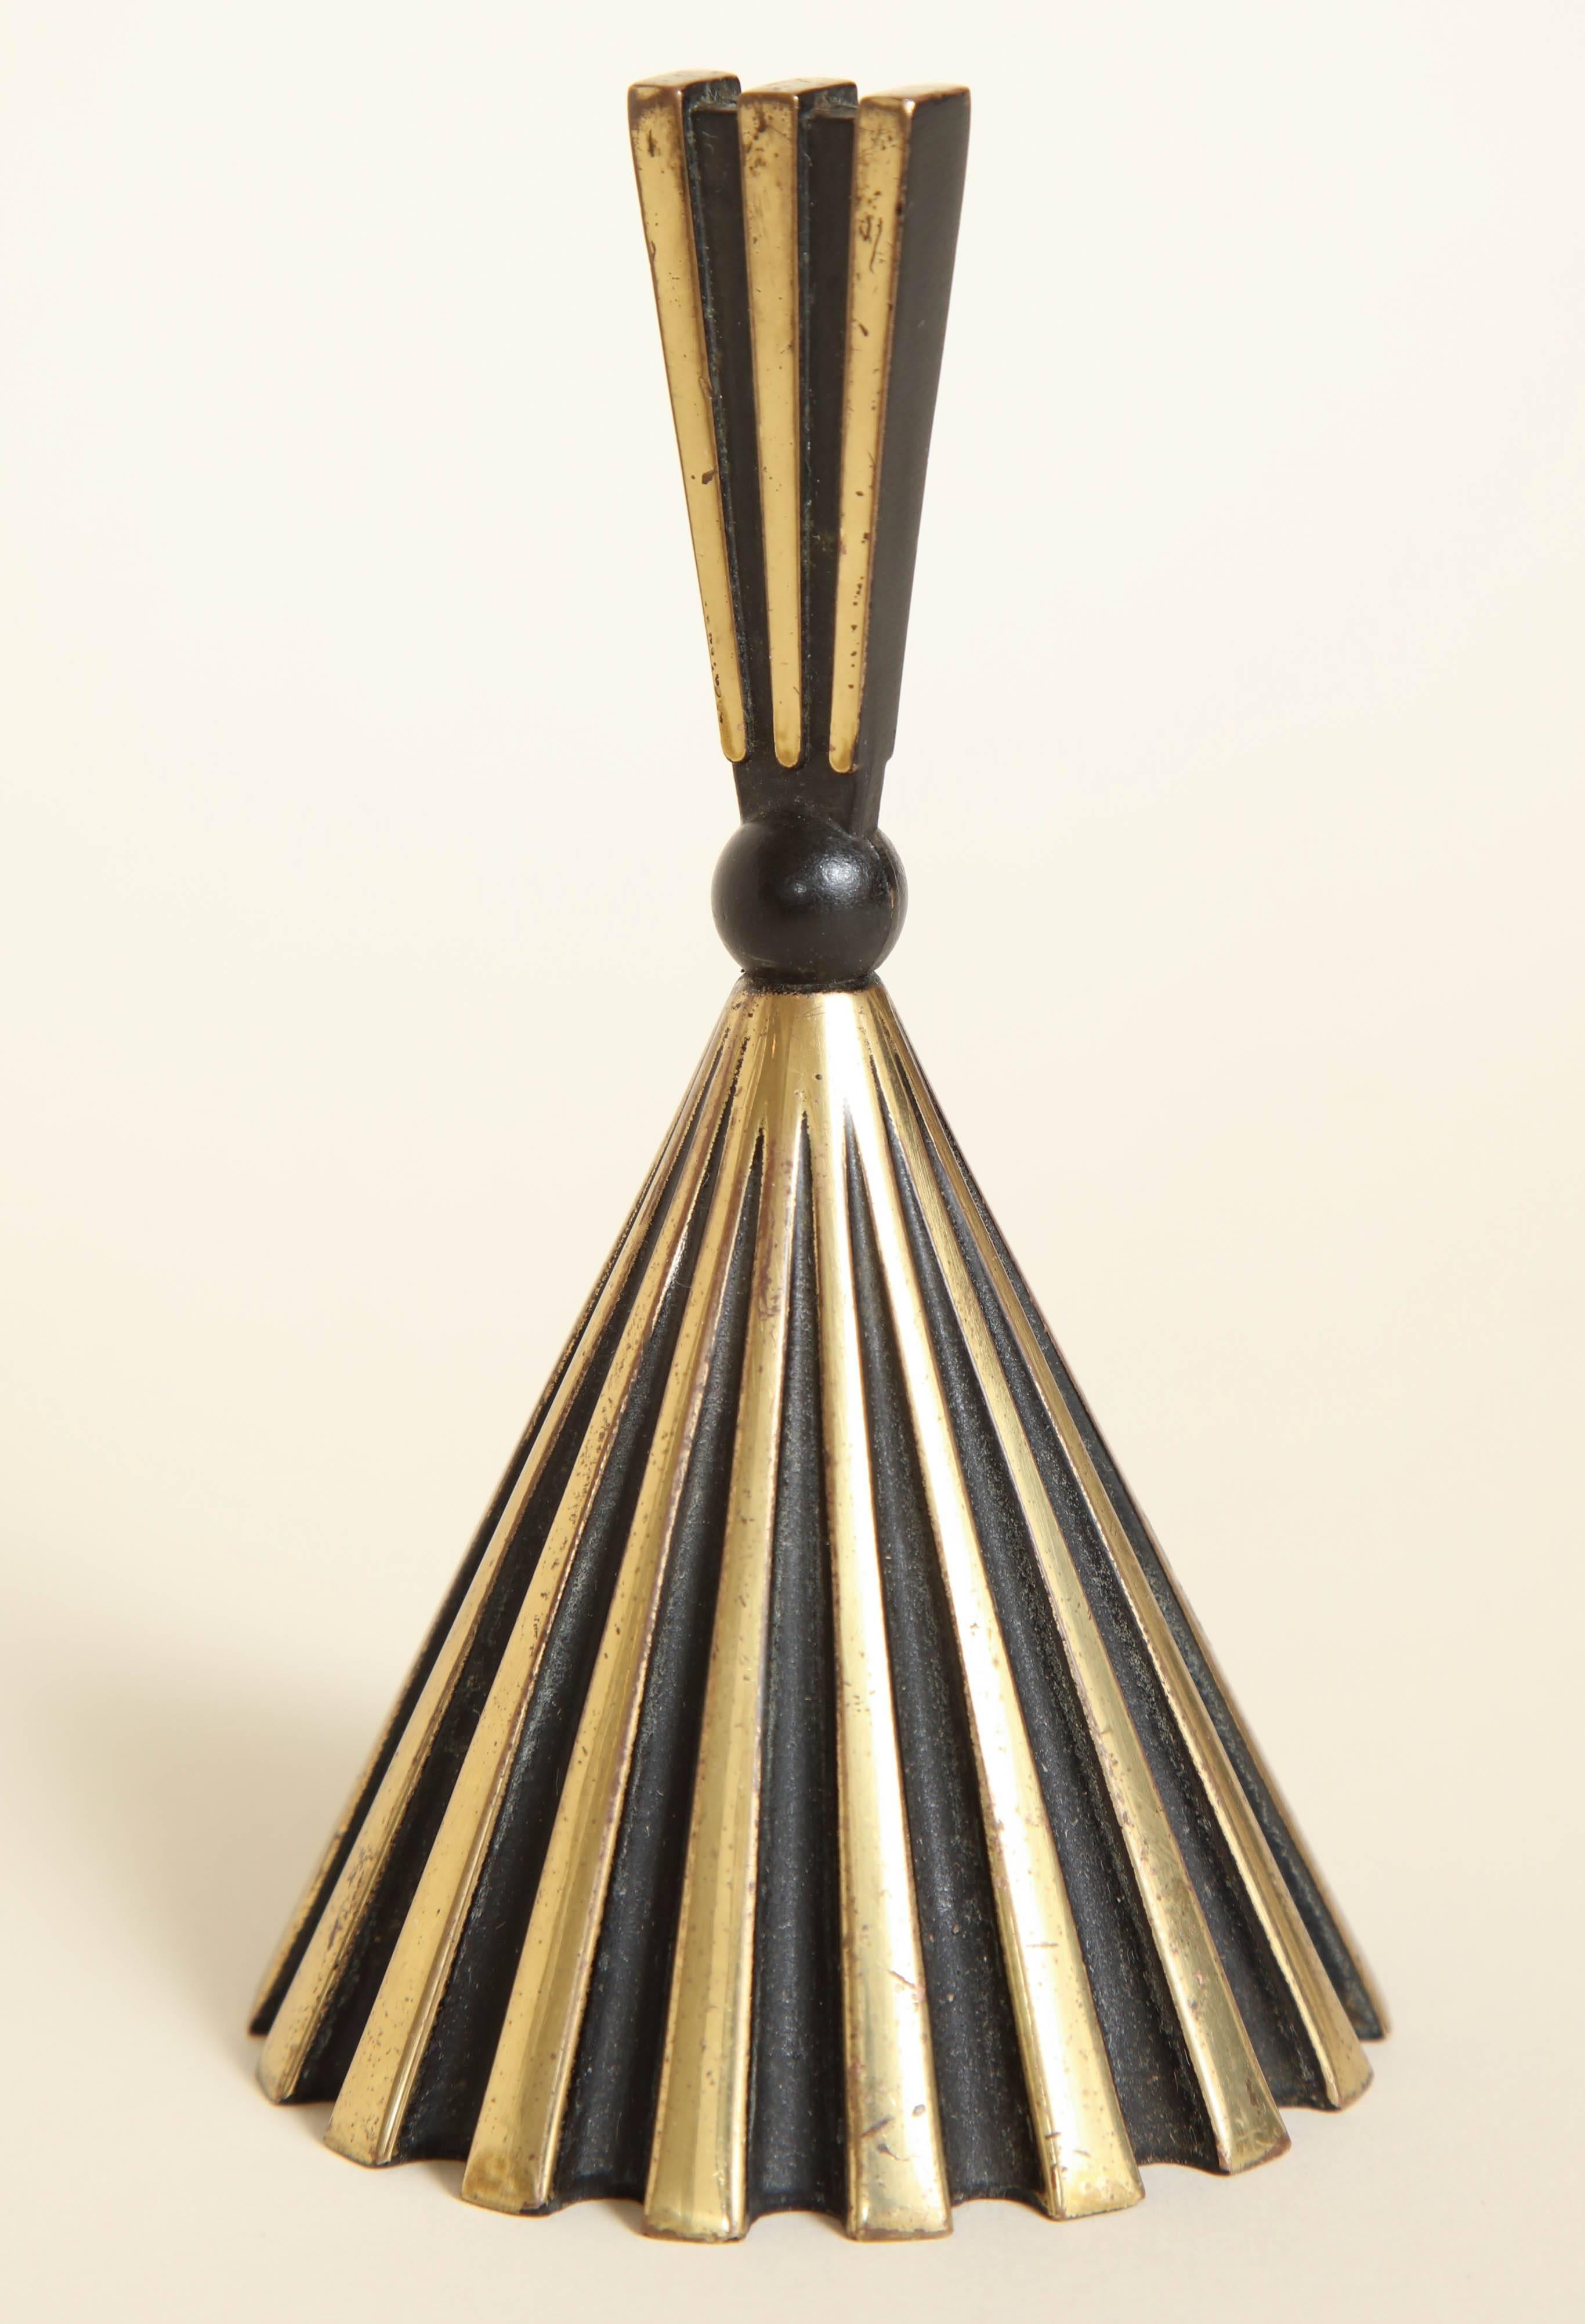 In the Bauhaus Wiener Werkstatte manner

The bell has a wide corrugated base alternating with shiny brass ribs and black matt grooves with a matching tapered grooved handle connected with a black metal bead. It is unmarked as was common. The bell is